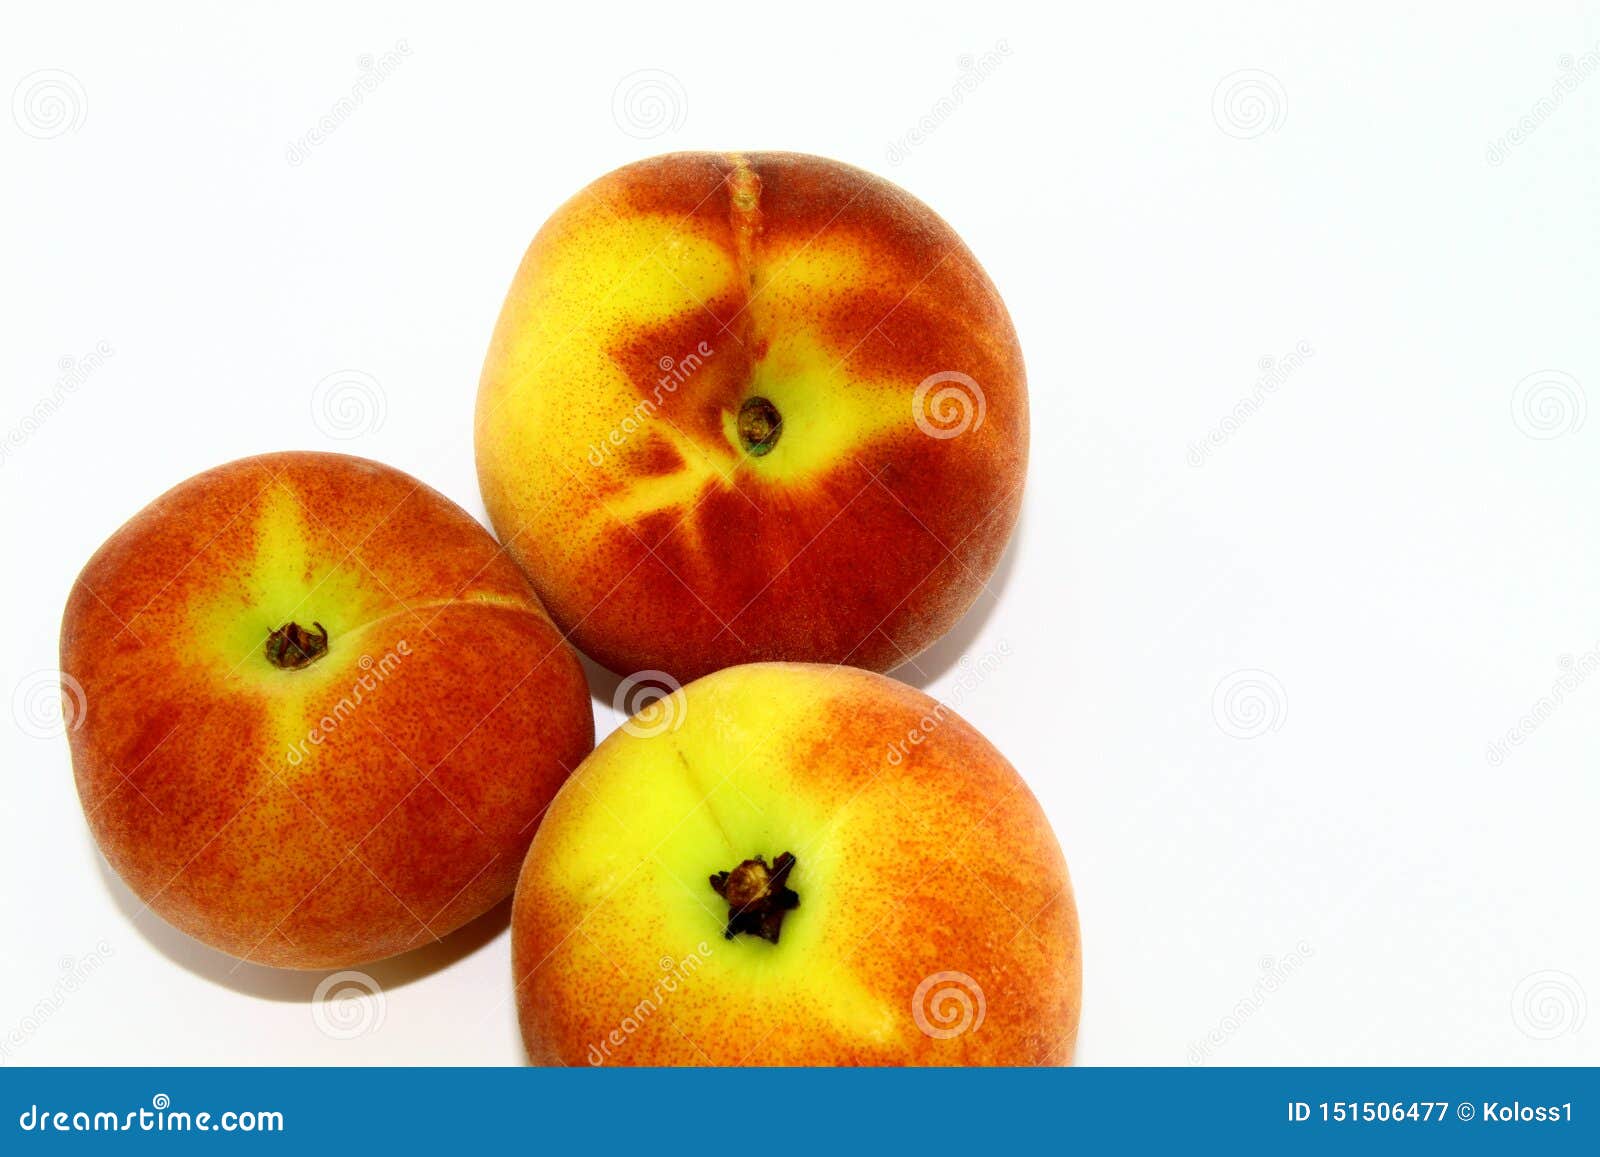 Bitten Juicy Peach White Photos Free Royalty Free Stock Photos From Dreamstime